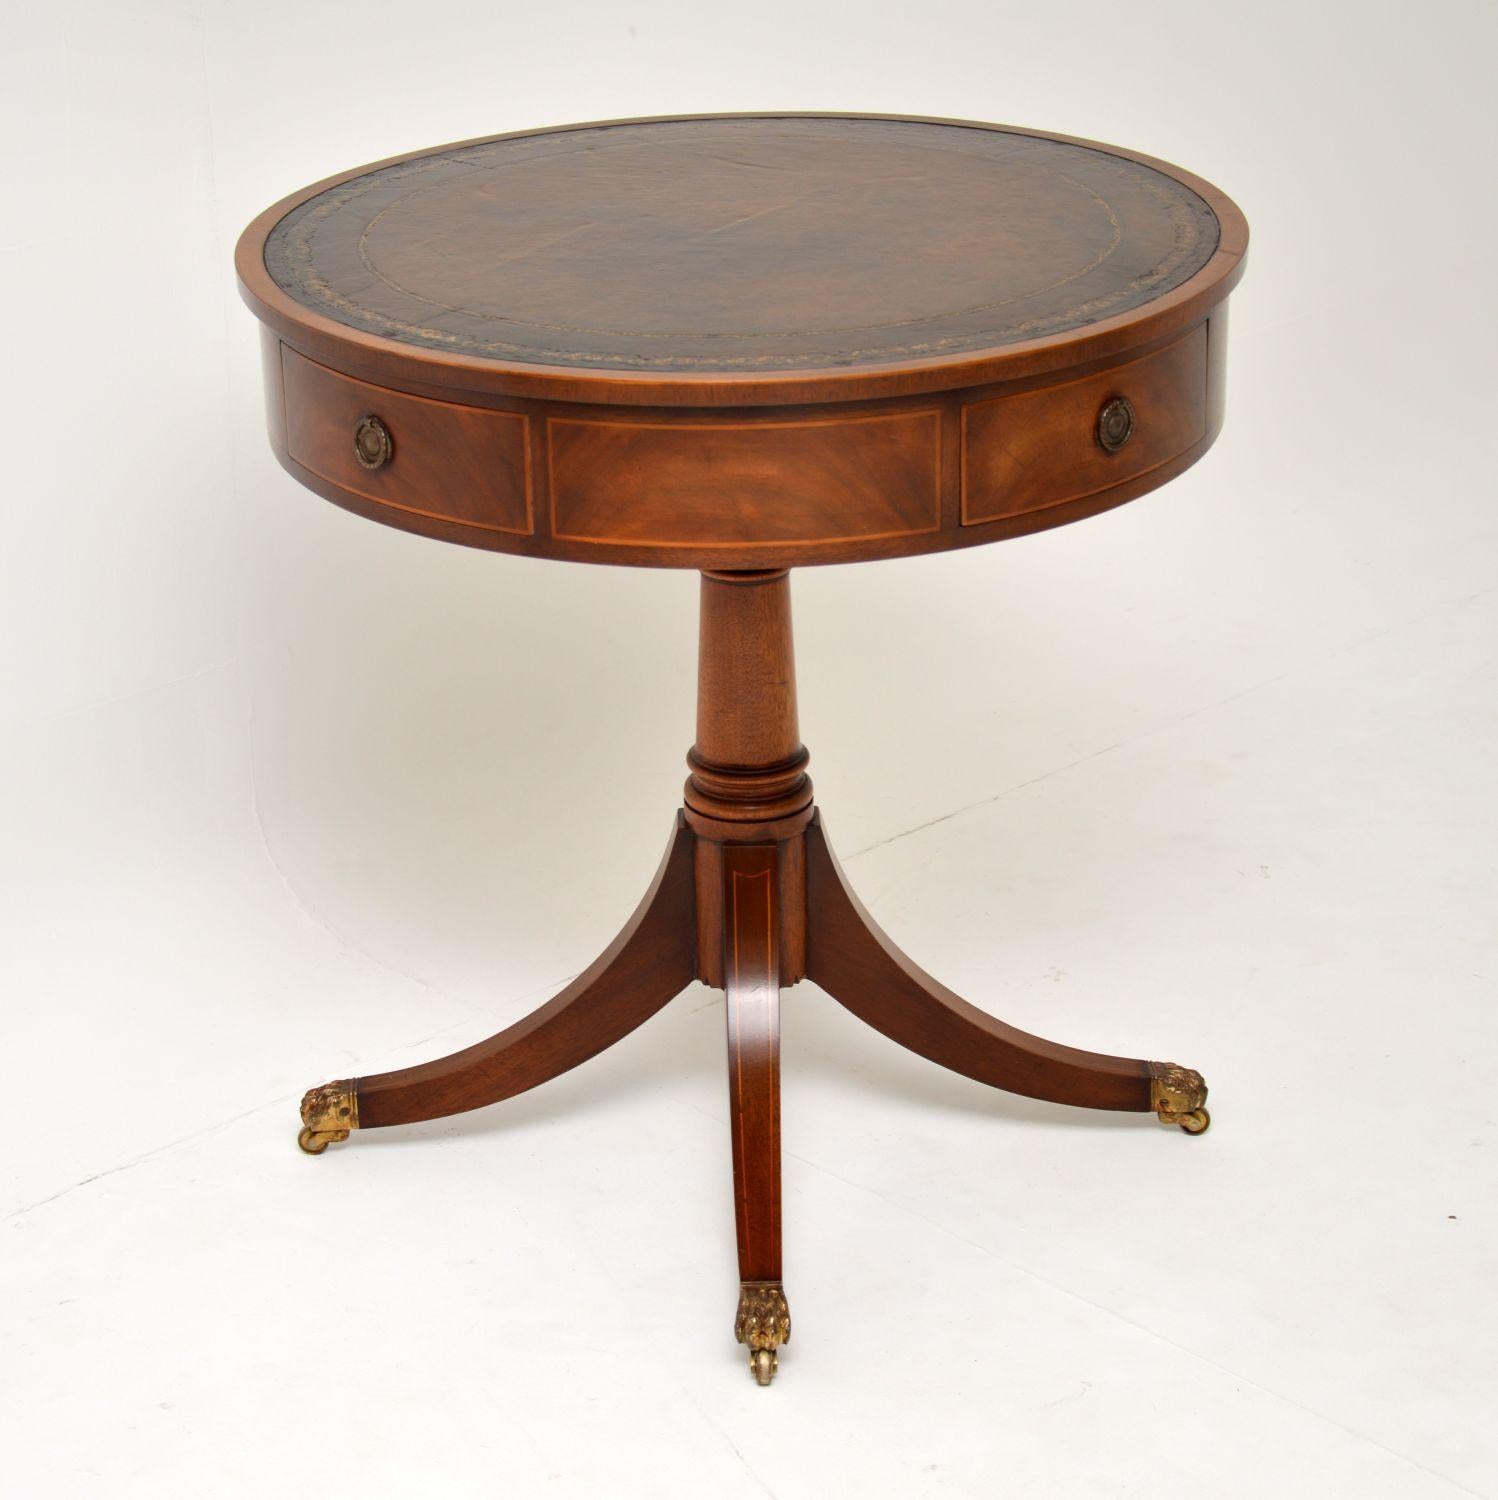 A smart and fine quality antique drum table in the Regency style. It’s beautifully made from mahogany, with satinwood inlays and a well tooled segmented leather top.

This dates from the 1920s-1930s, it is in excellent condition for its age, we